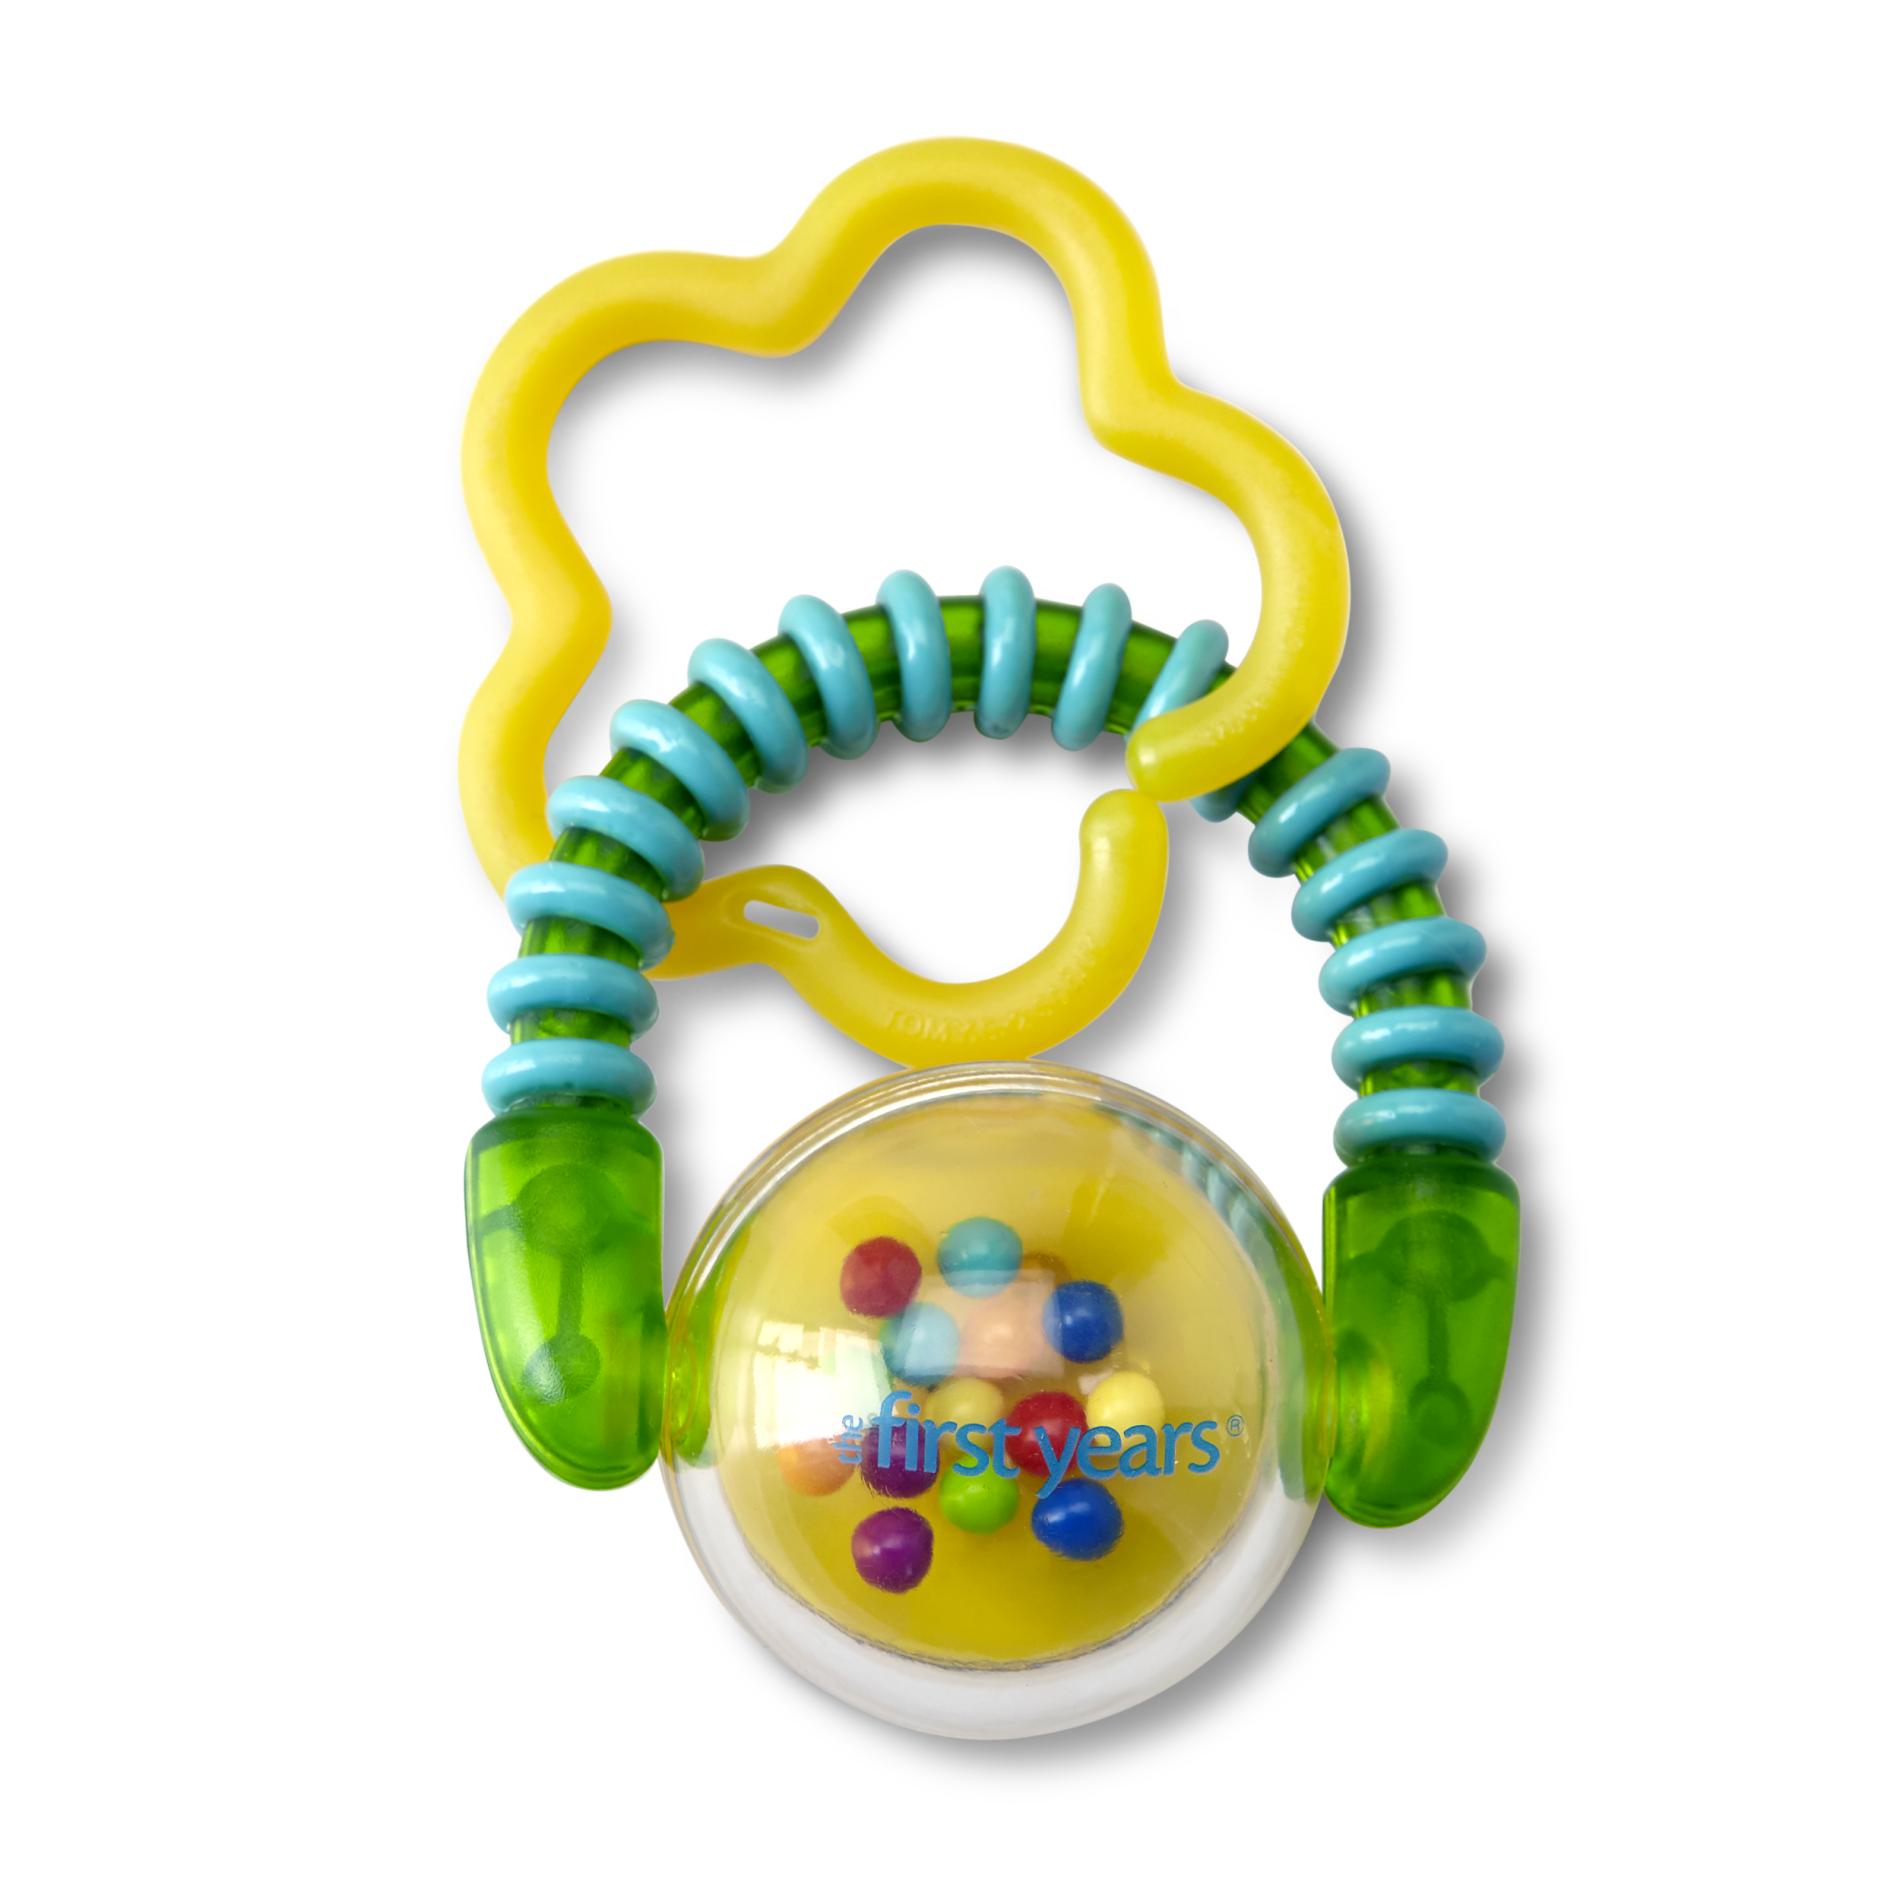 The First Years Infants' Spin & Smile Rattle